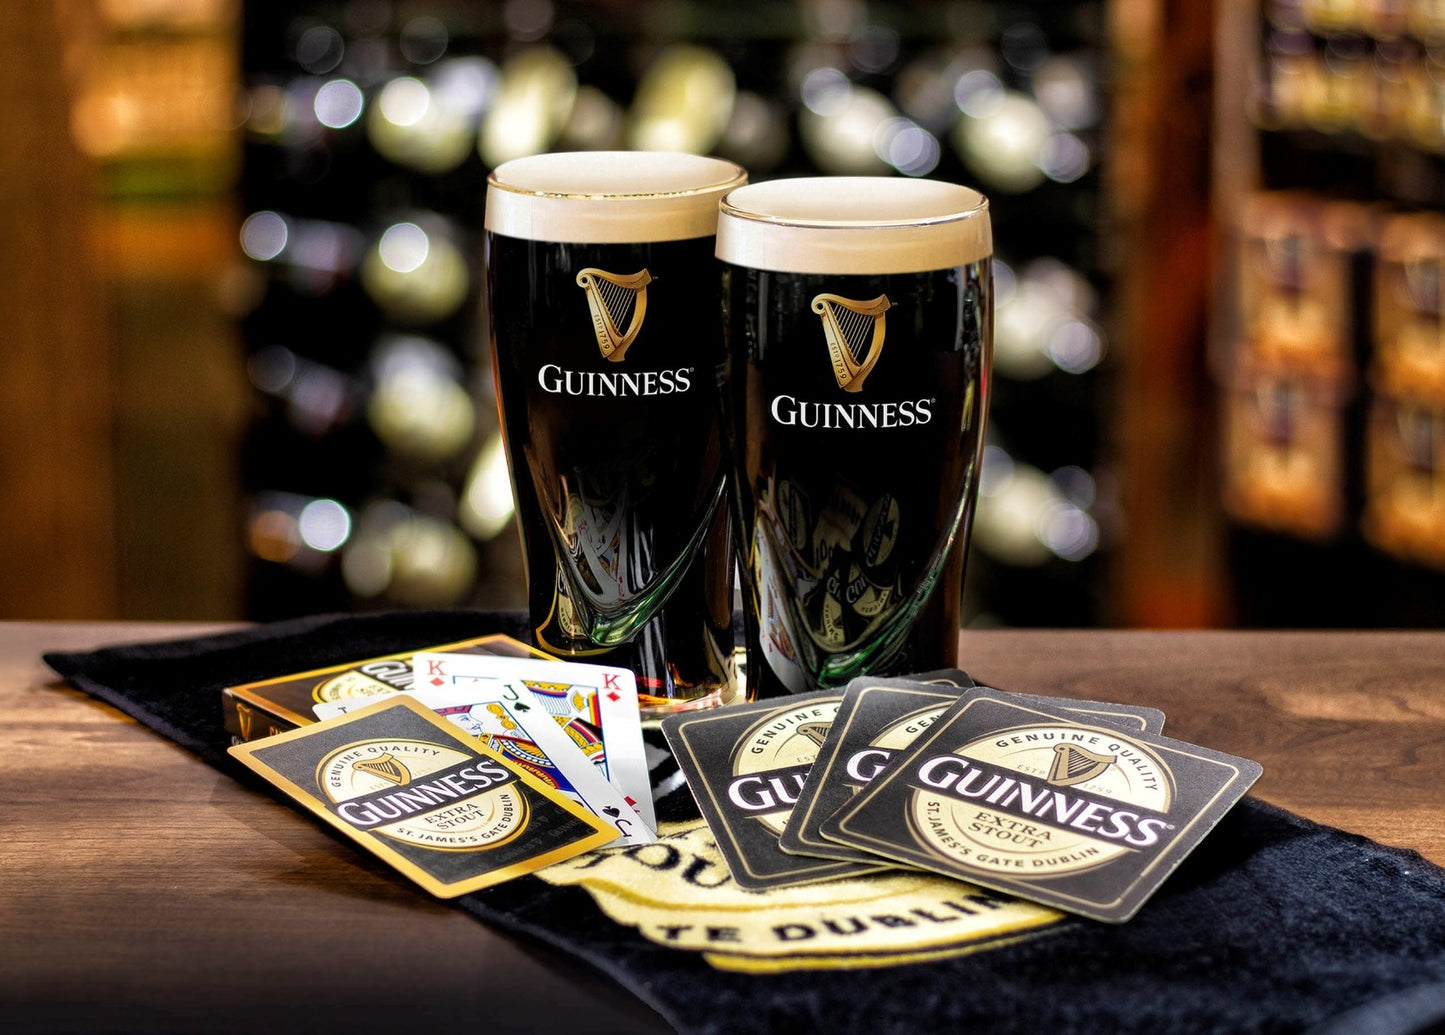 Two Guinness Home Bar Pack pint glasses and playing cards on a table.